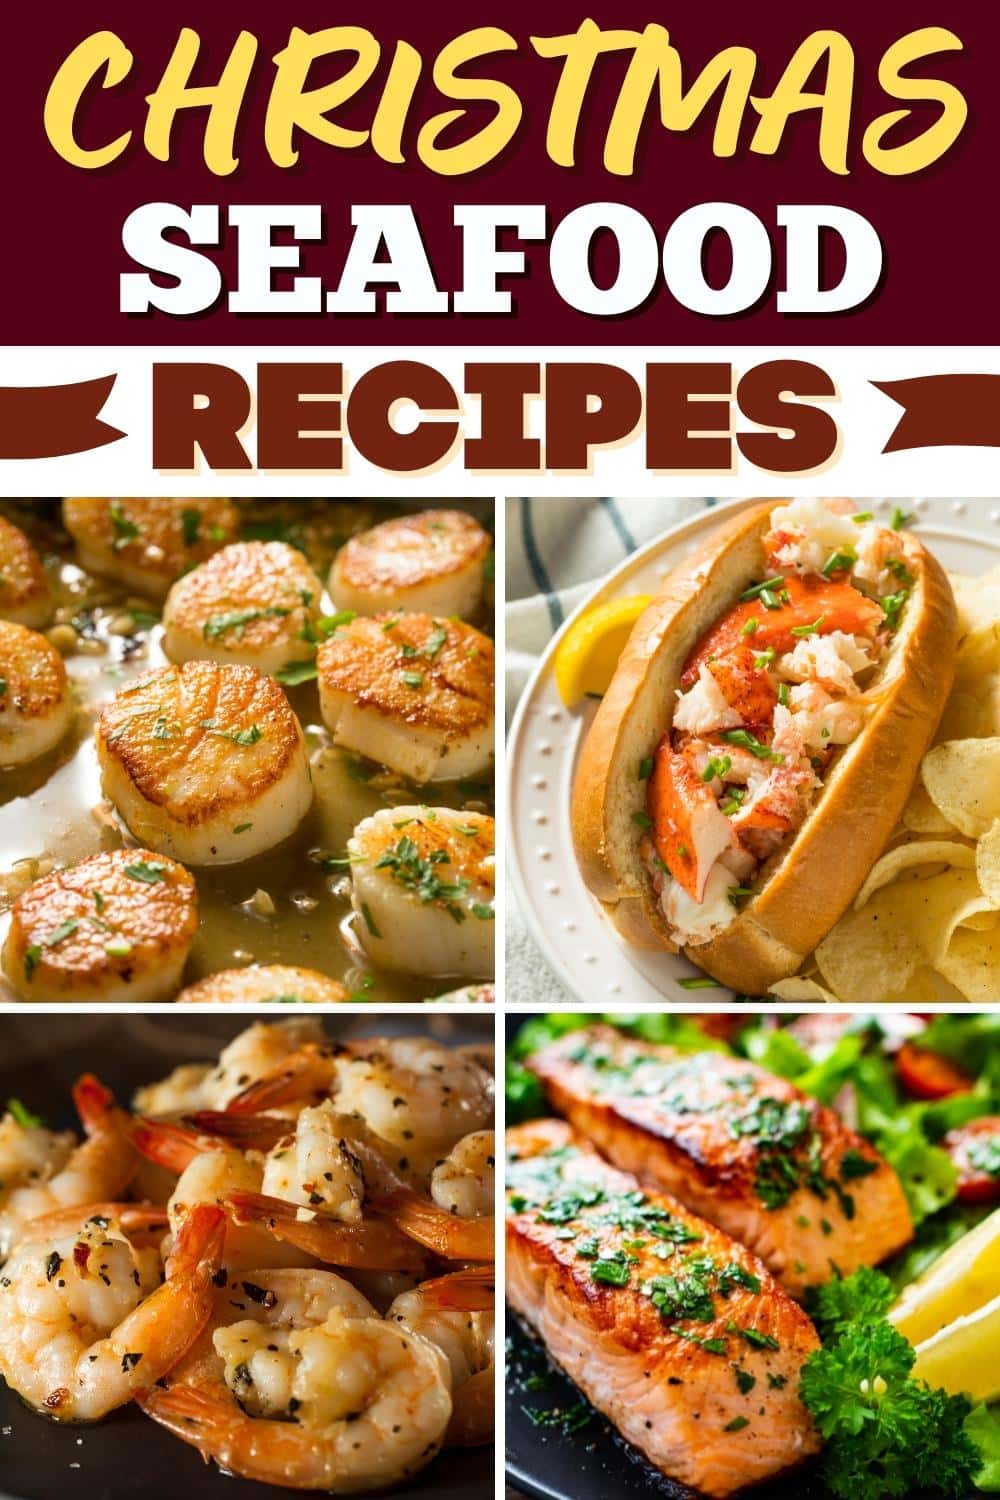 40 Best Christmas Seafood Recipes (+ Easy Dinner Ideas) - Insanely Good